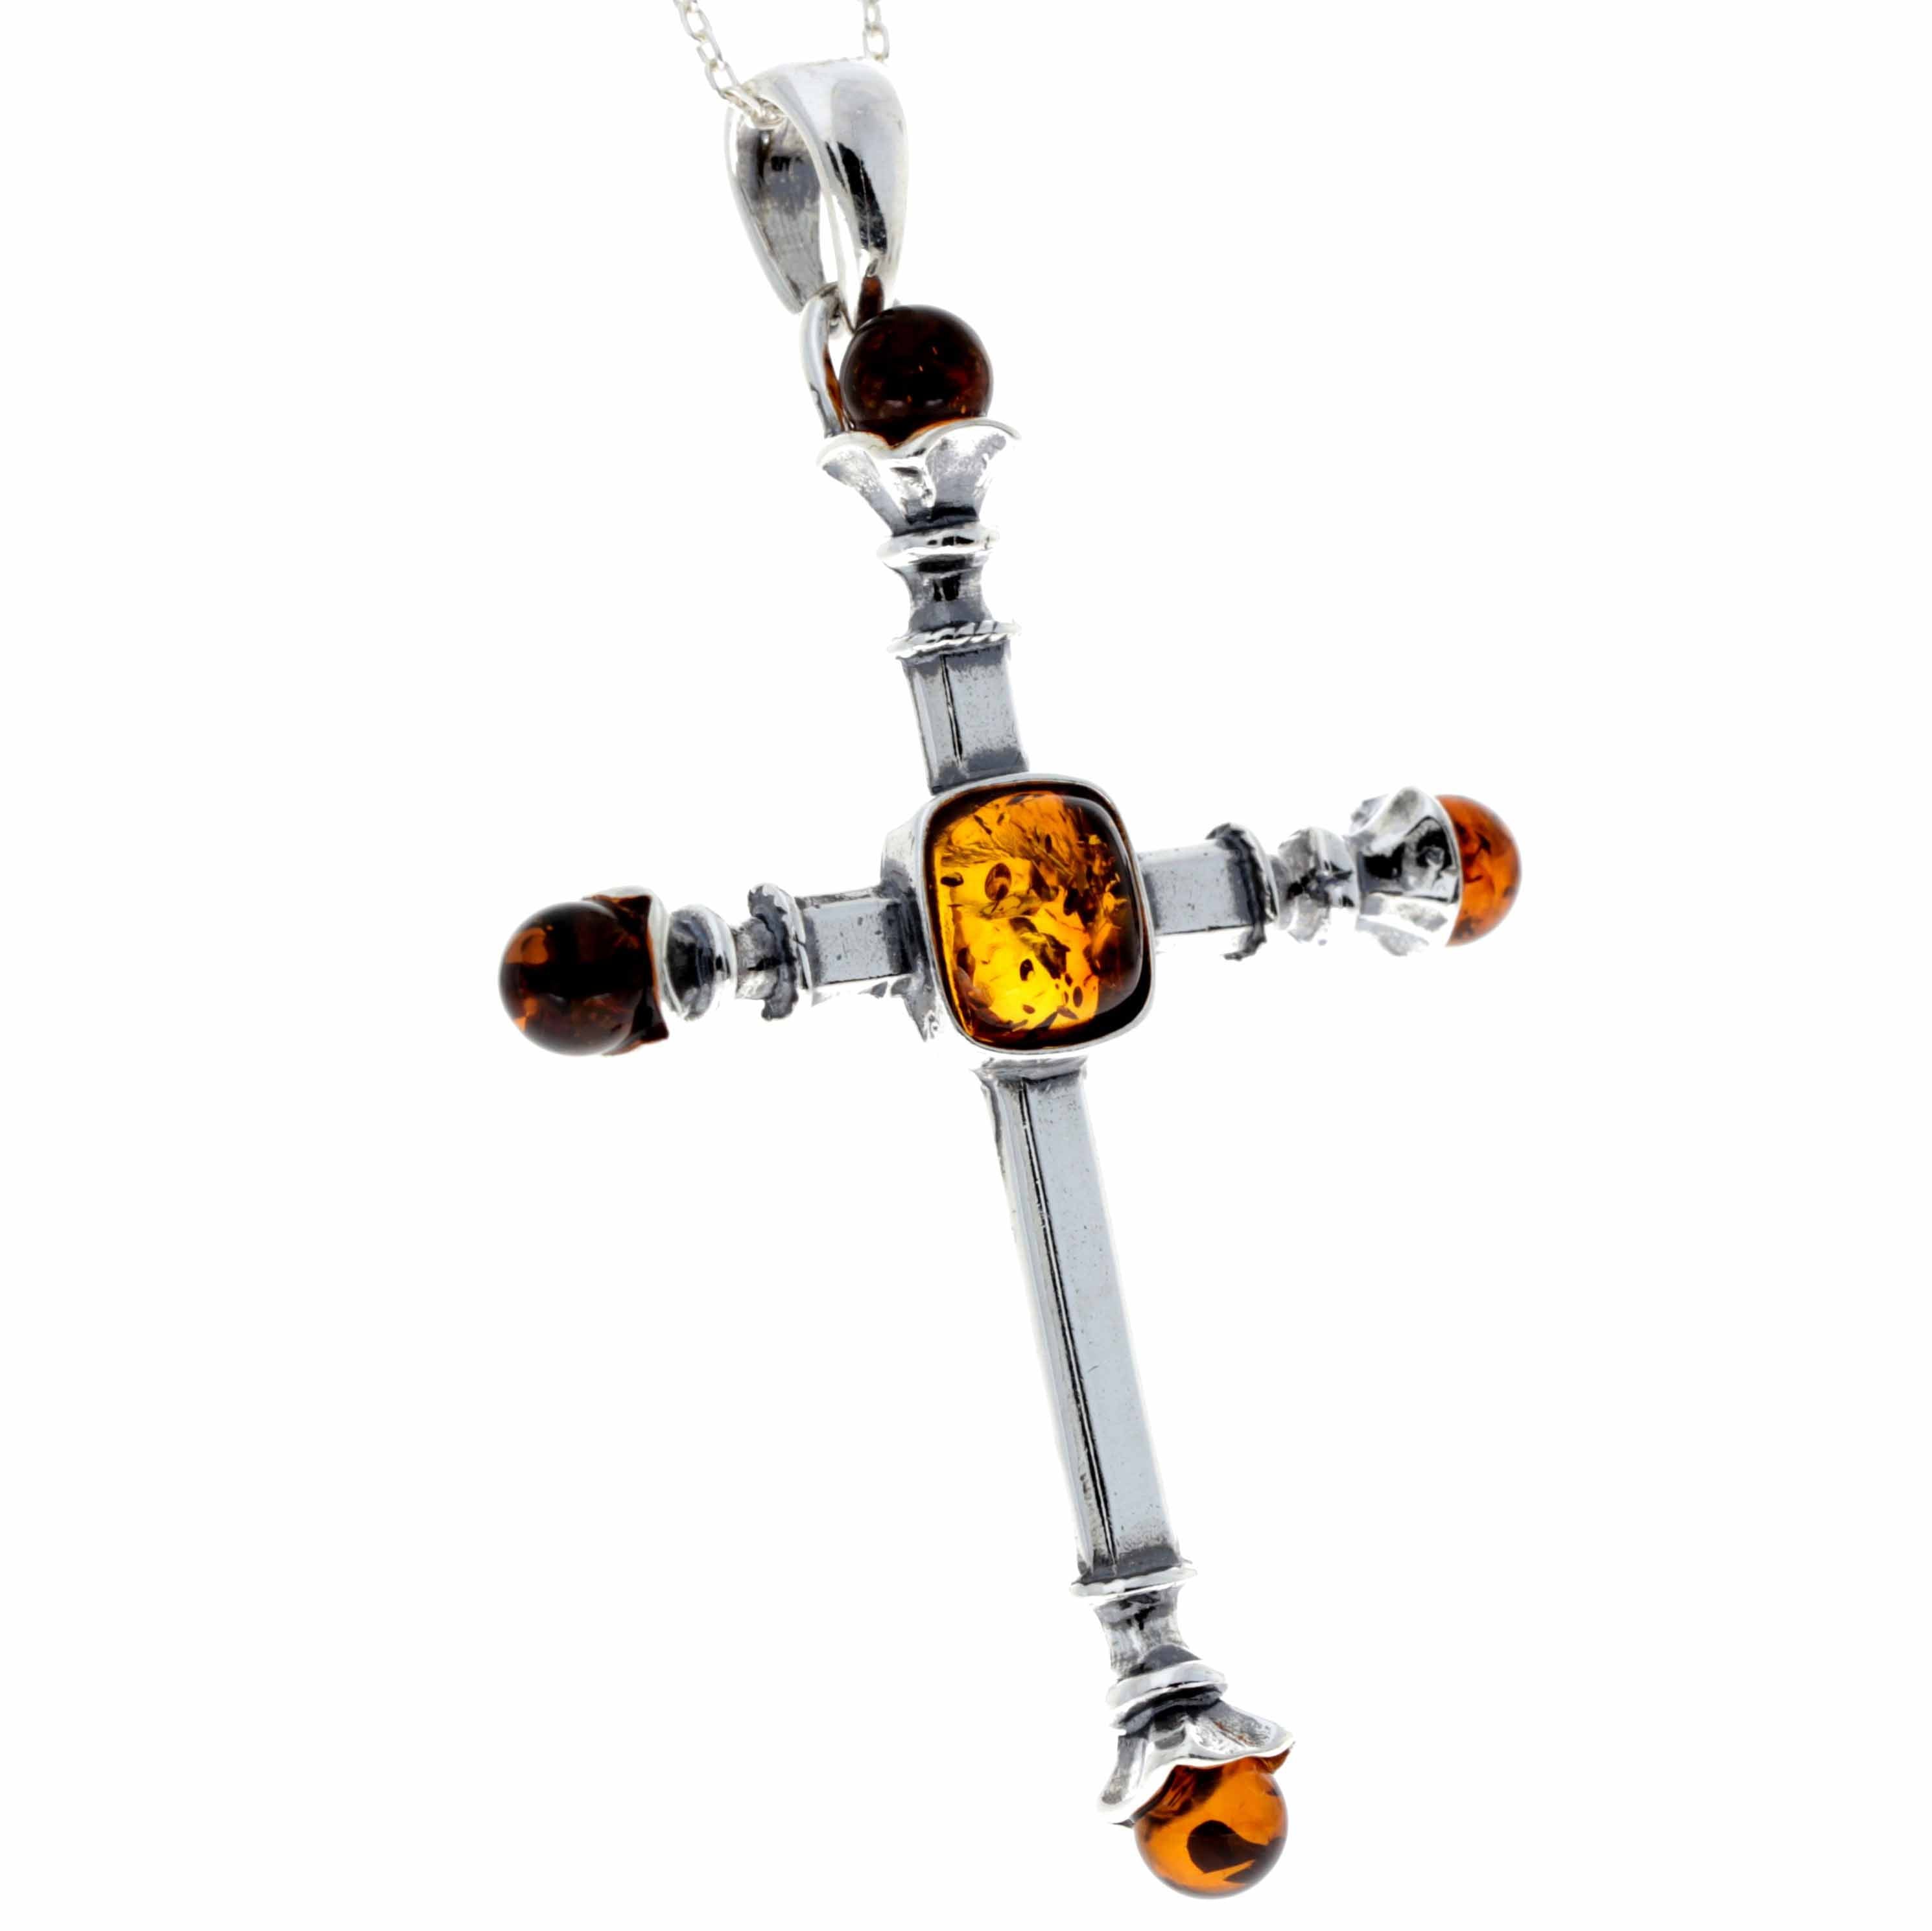 925 Sterling Silver & Baltic Amber Large Cross Pendant - 1590